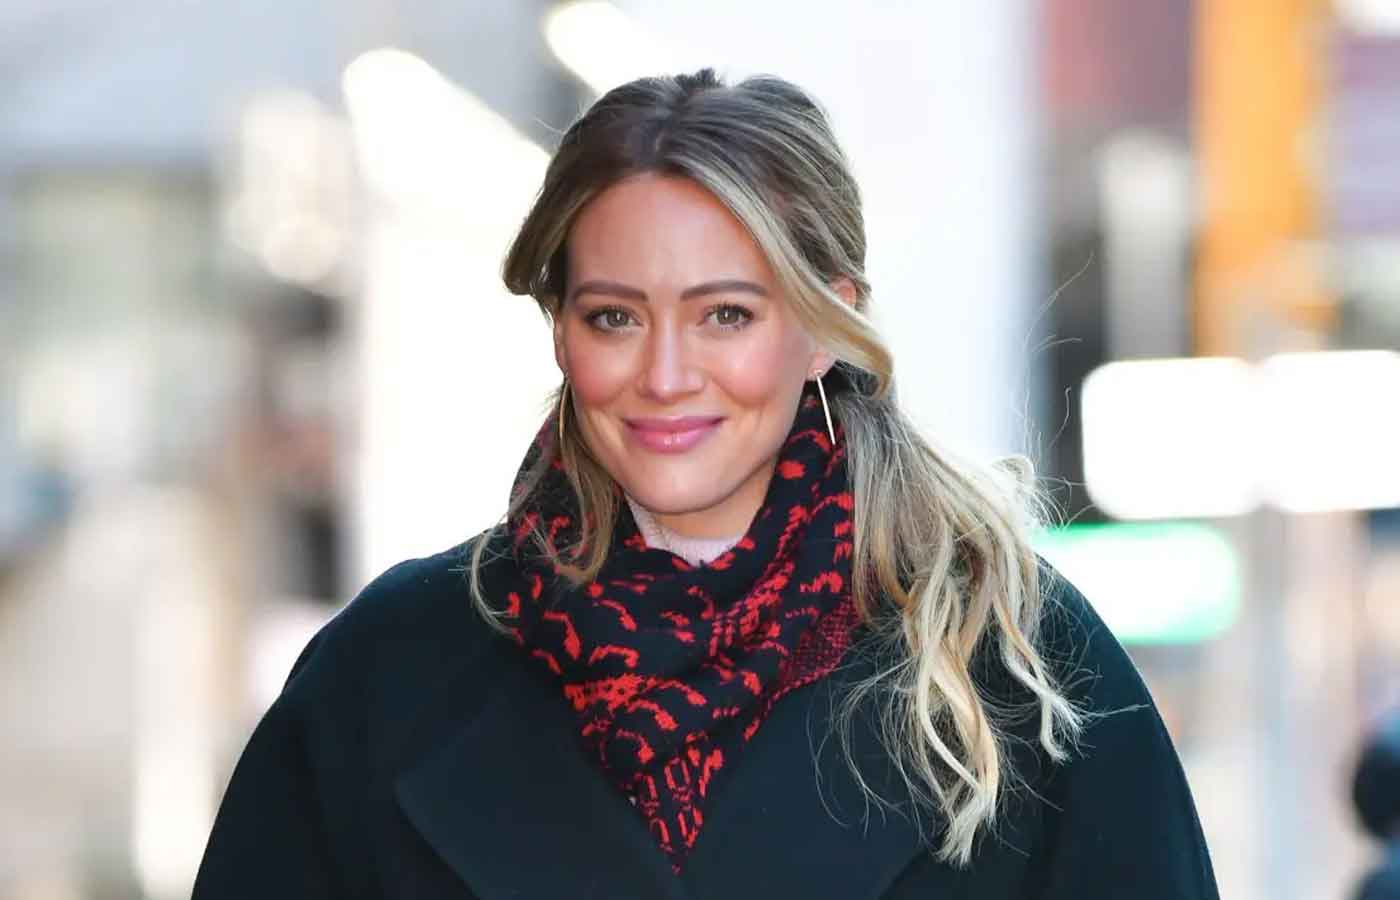 HILARY-DUFF-CONTRACTS-THE-DELTA-VARIANT-OF-COVID-19